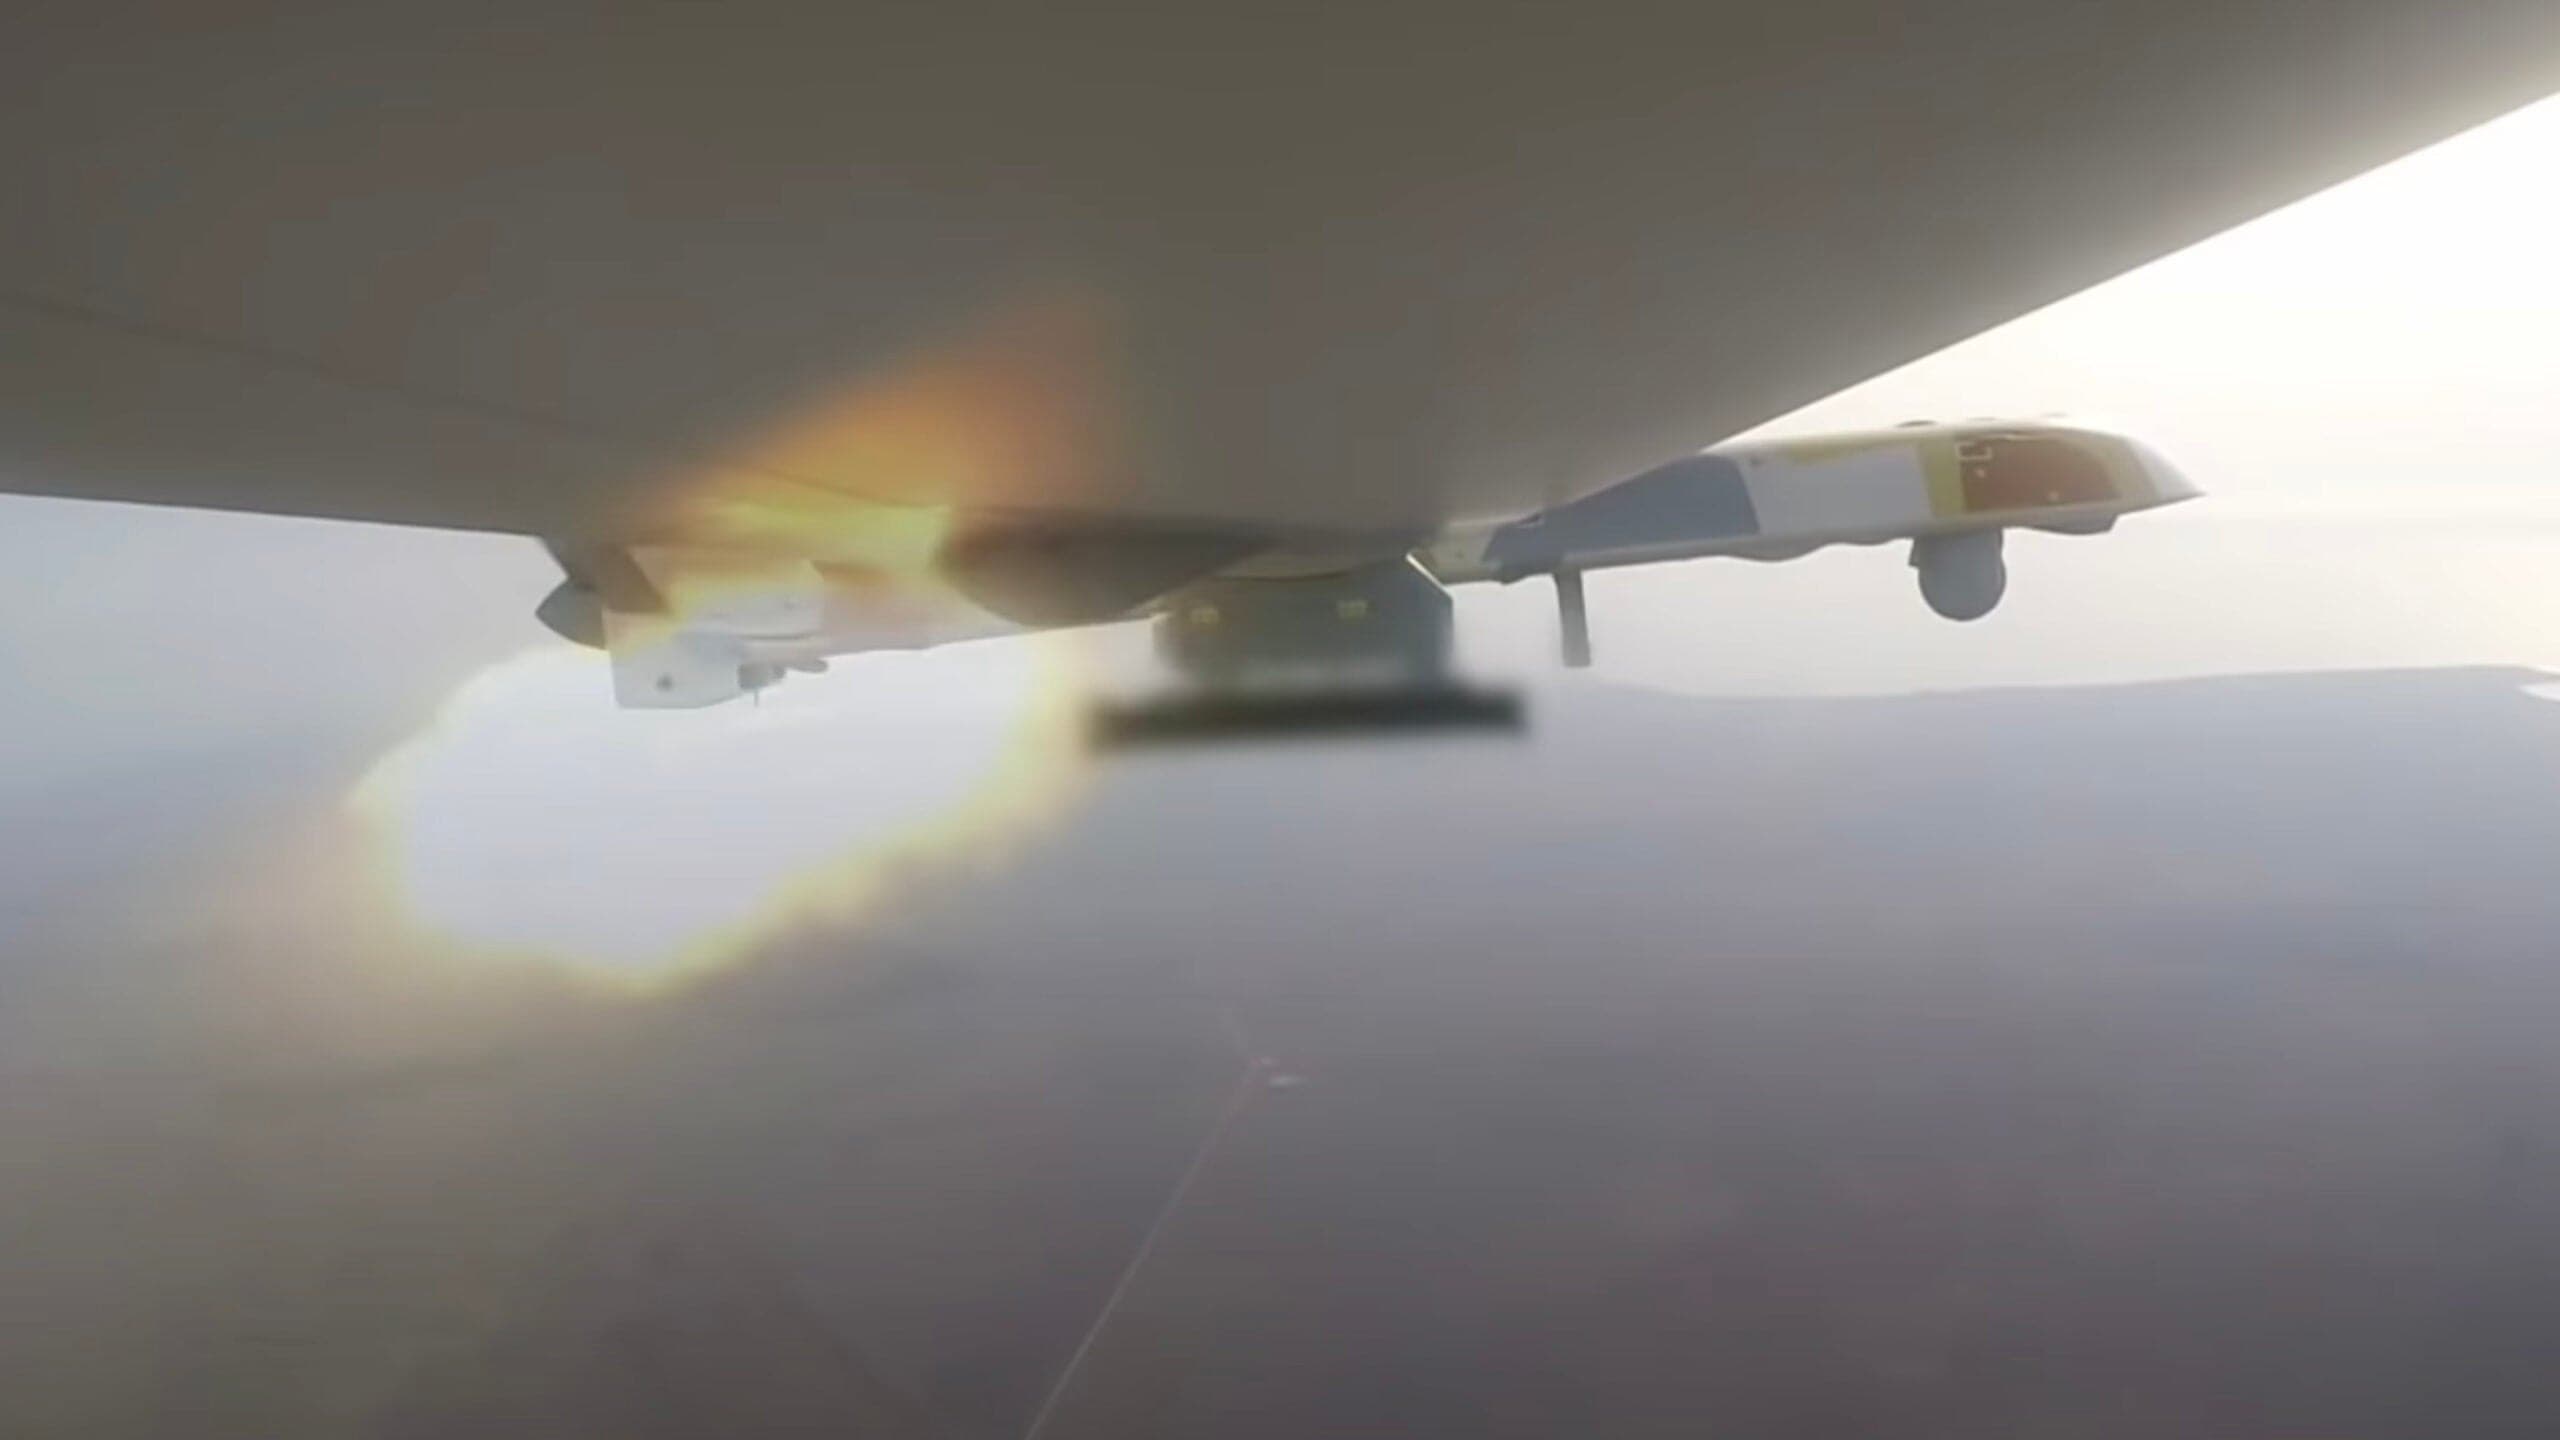 Russia Provides A Glimpse Of Its Orion Drone Executing Combat Trials In Syria